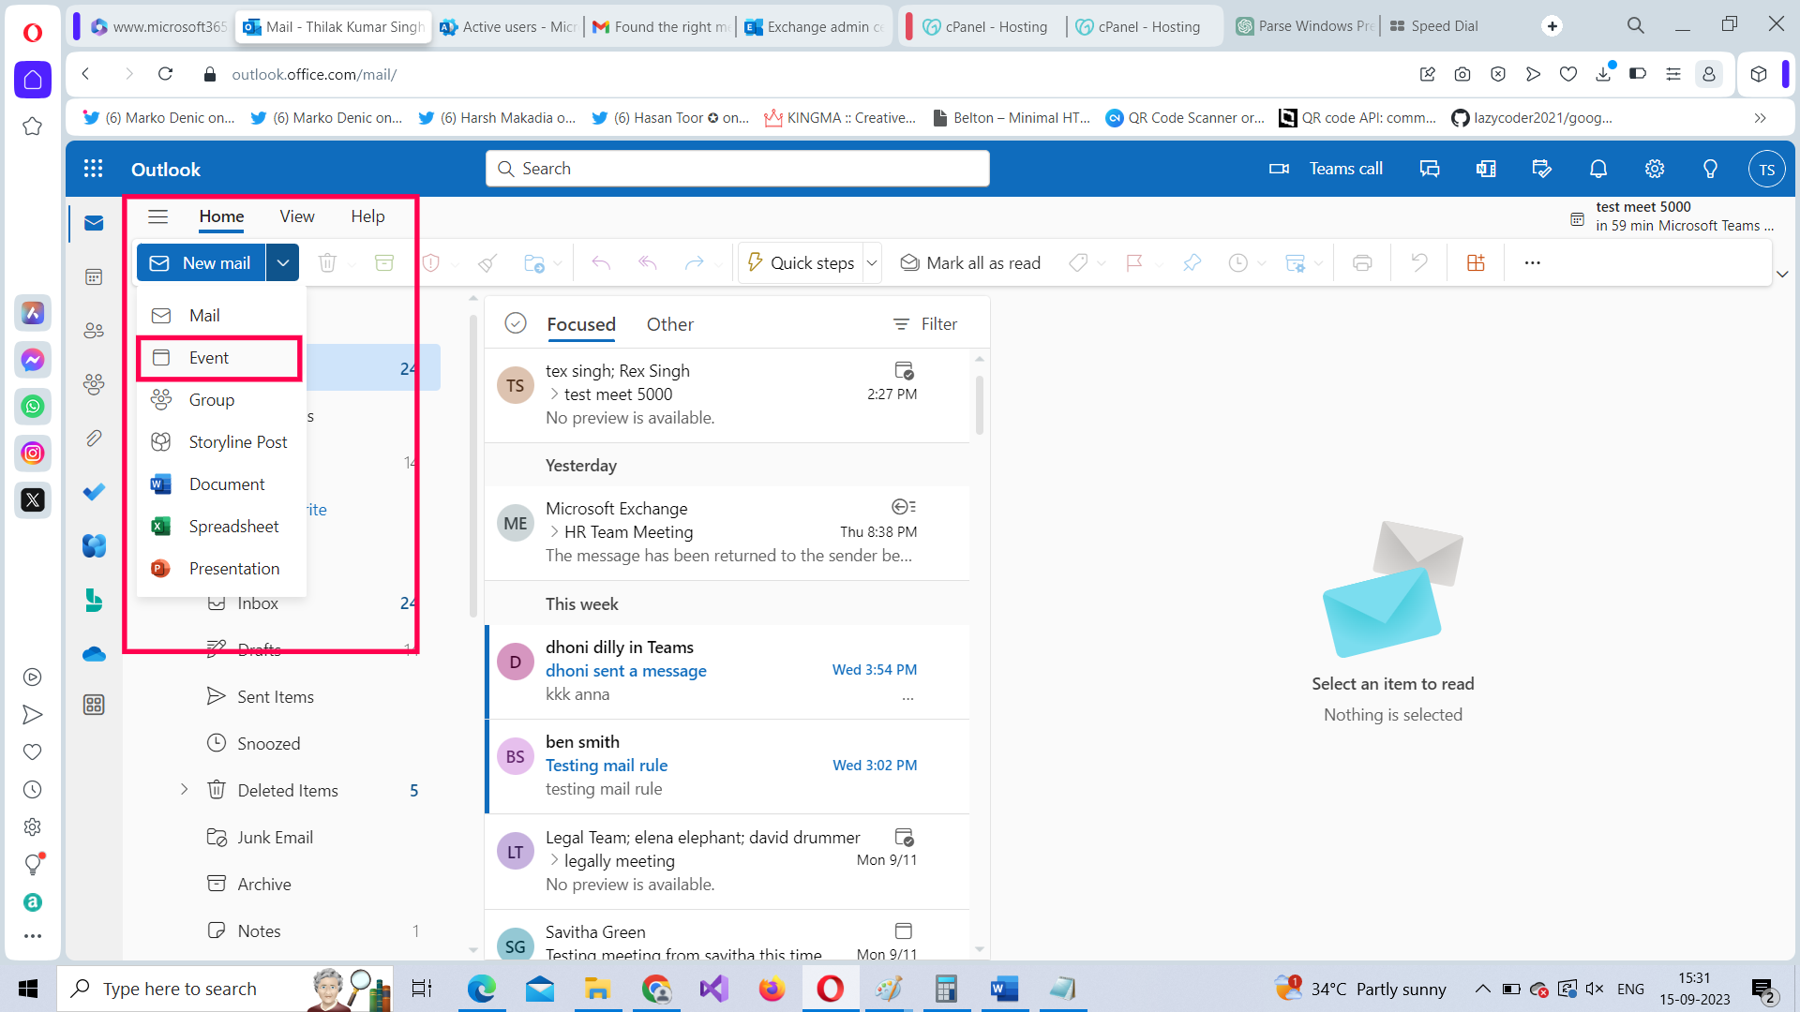 This screenshot shows how you test the configured Microsoft 365 mail flow rule using Outlook on the web. In the left pane, New mail and Event are selected.